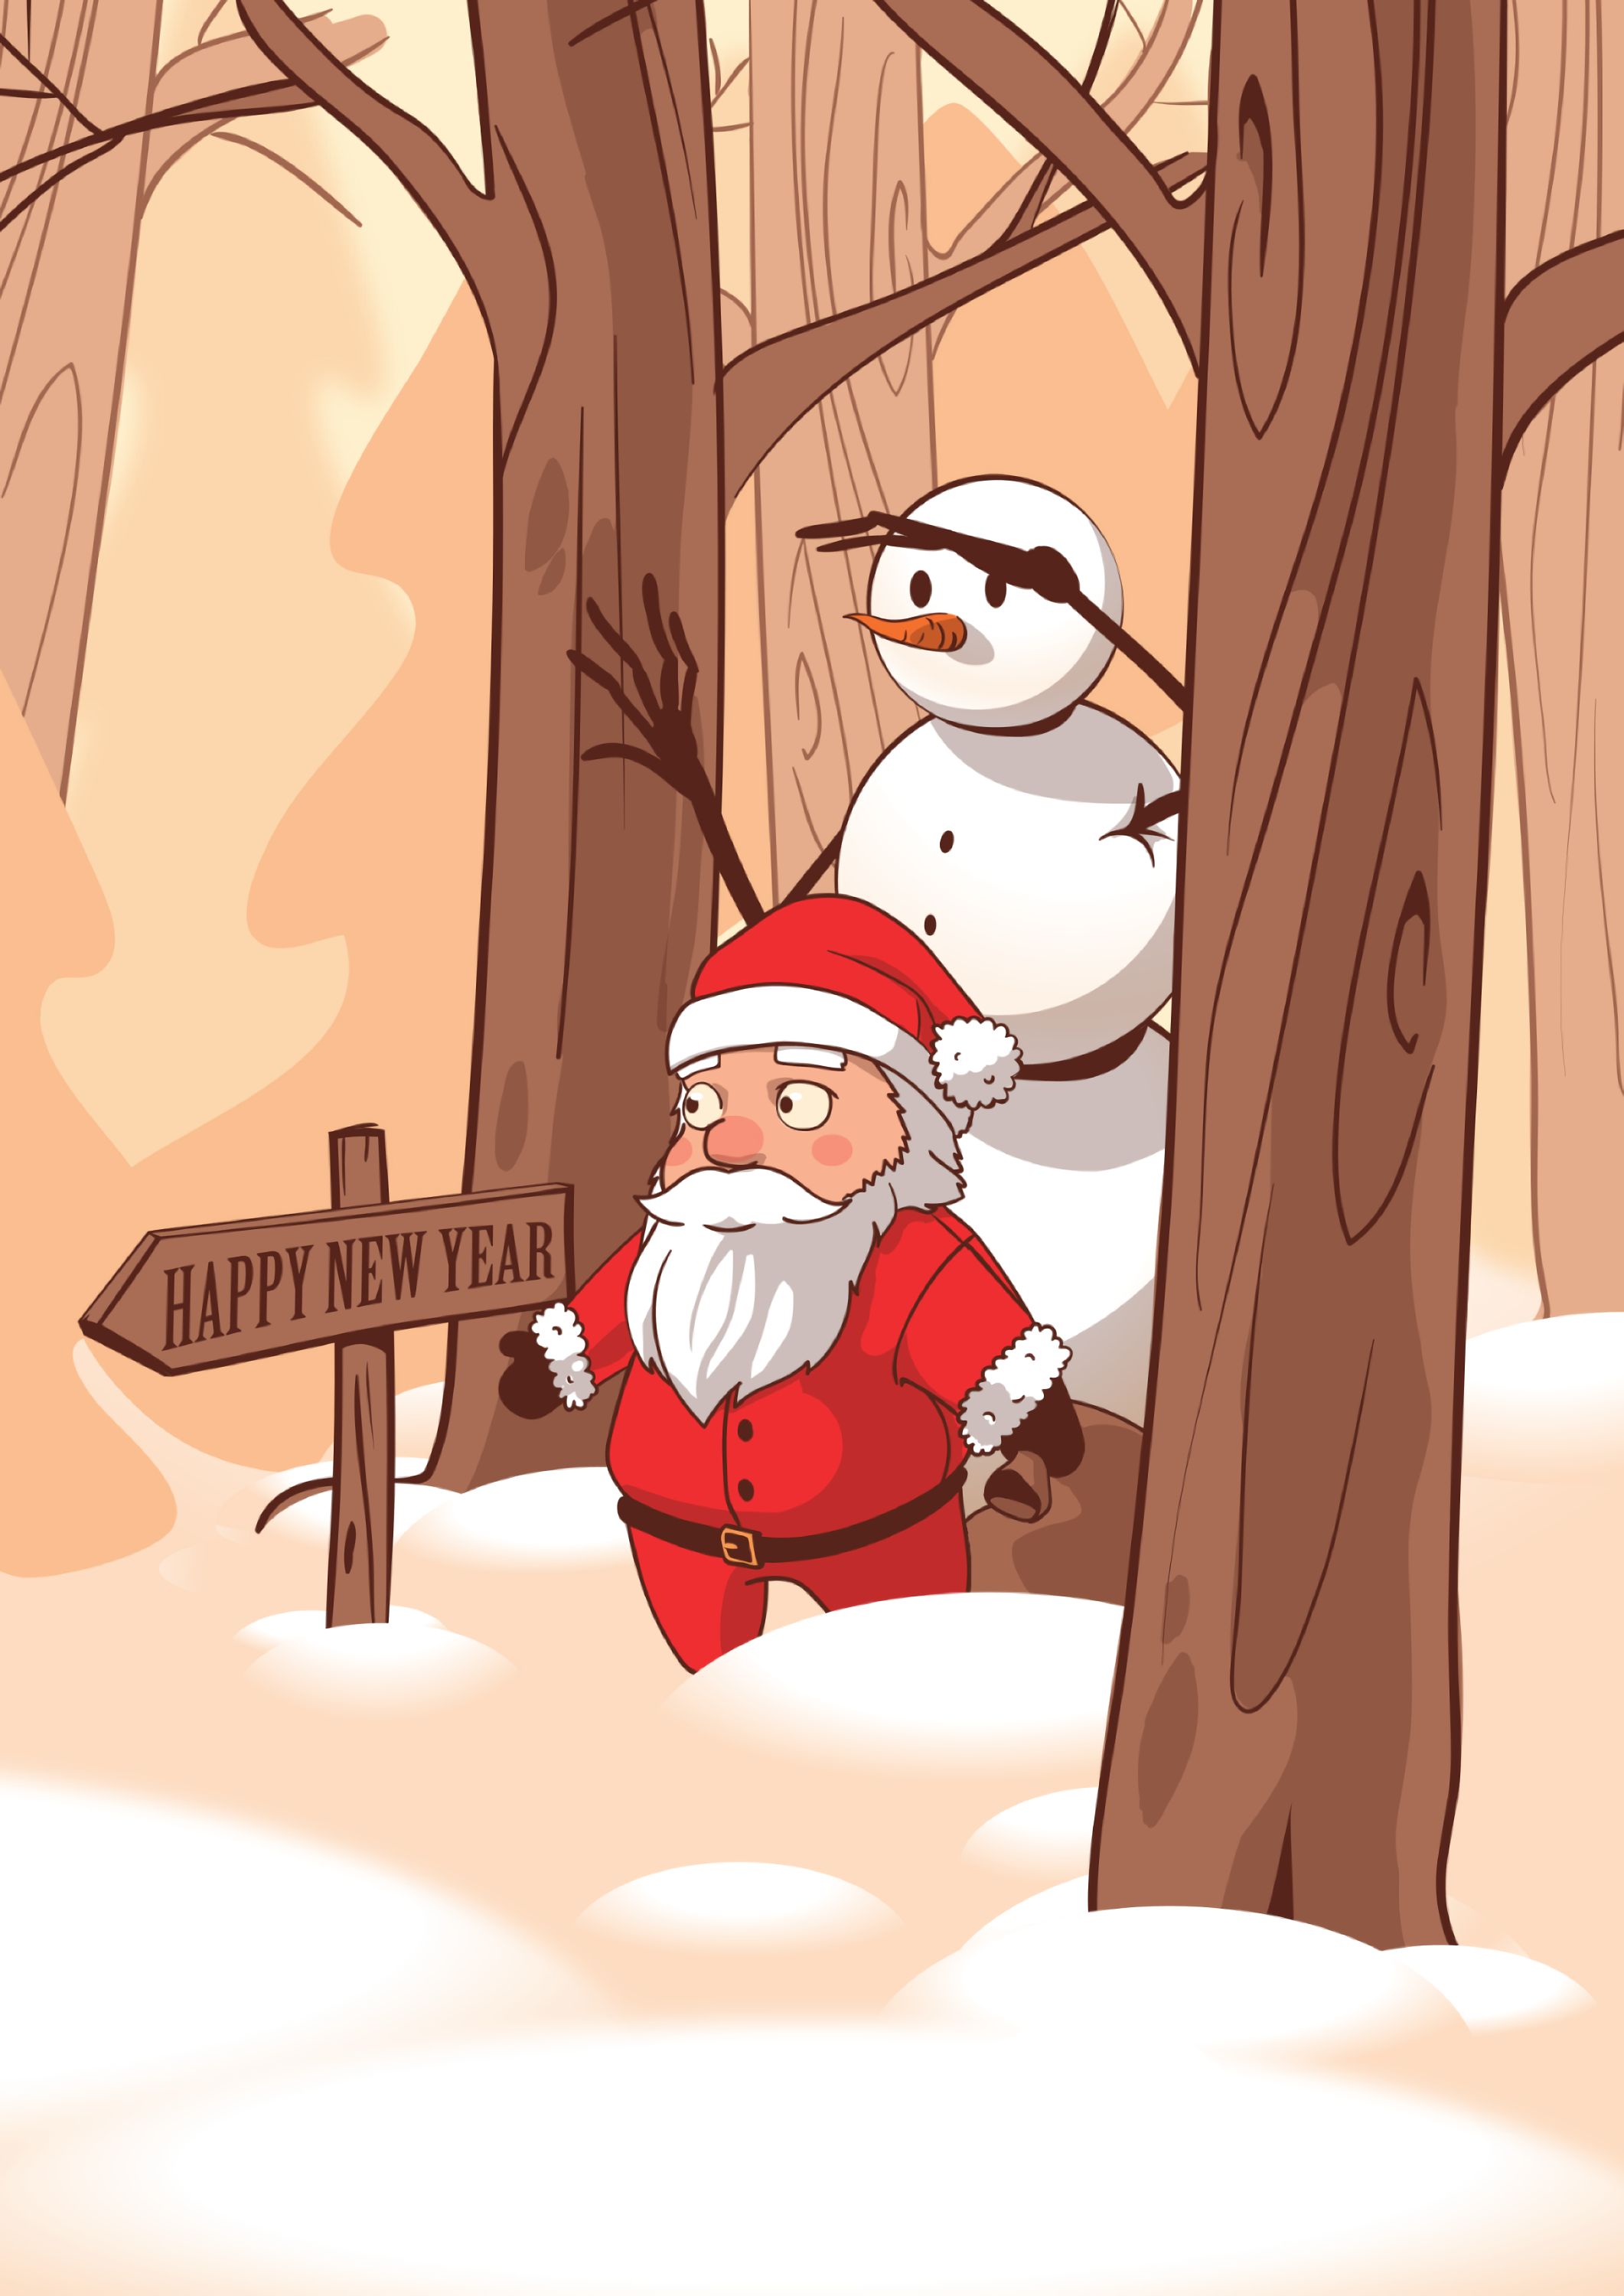 santa claus, vector, holidays, new year, snowman, forest